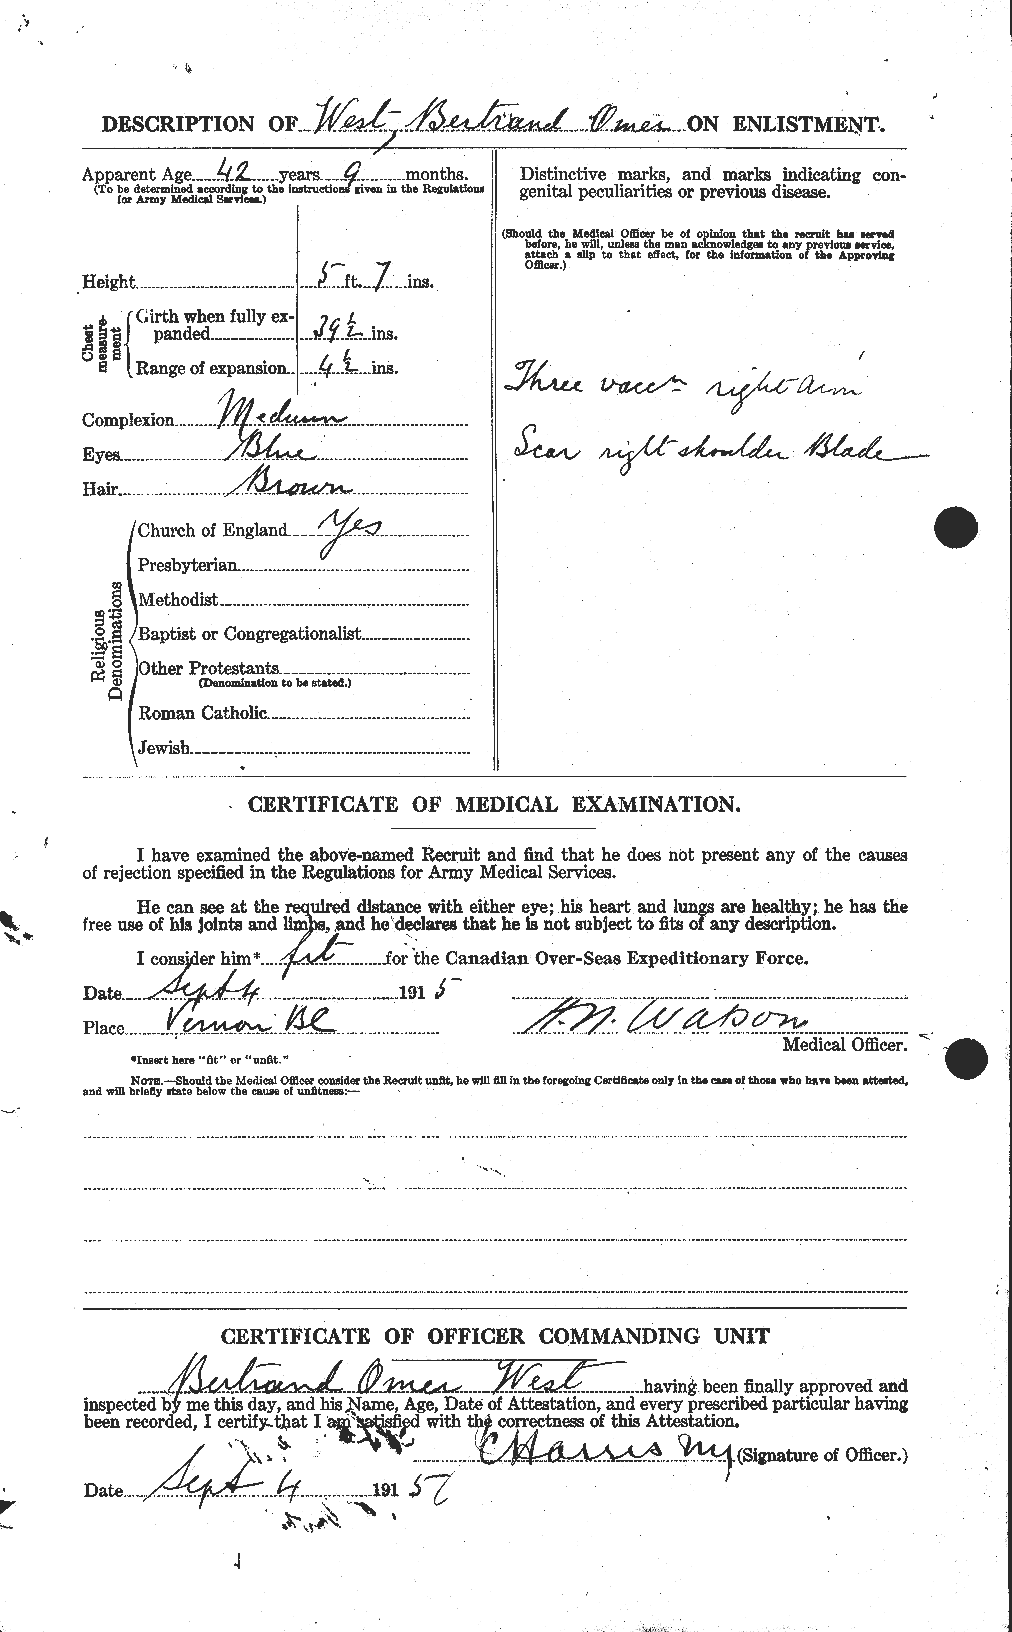 Personnel Records of the First World War - CEF 666074b